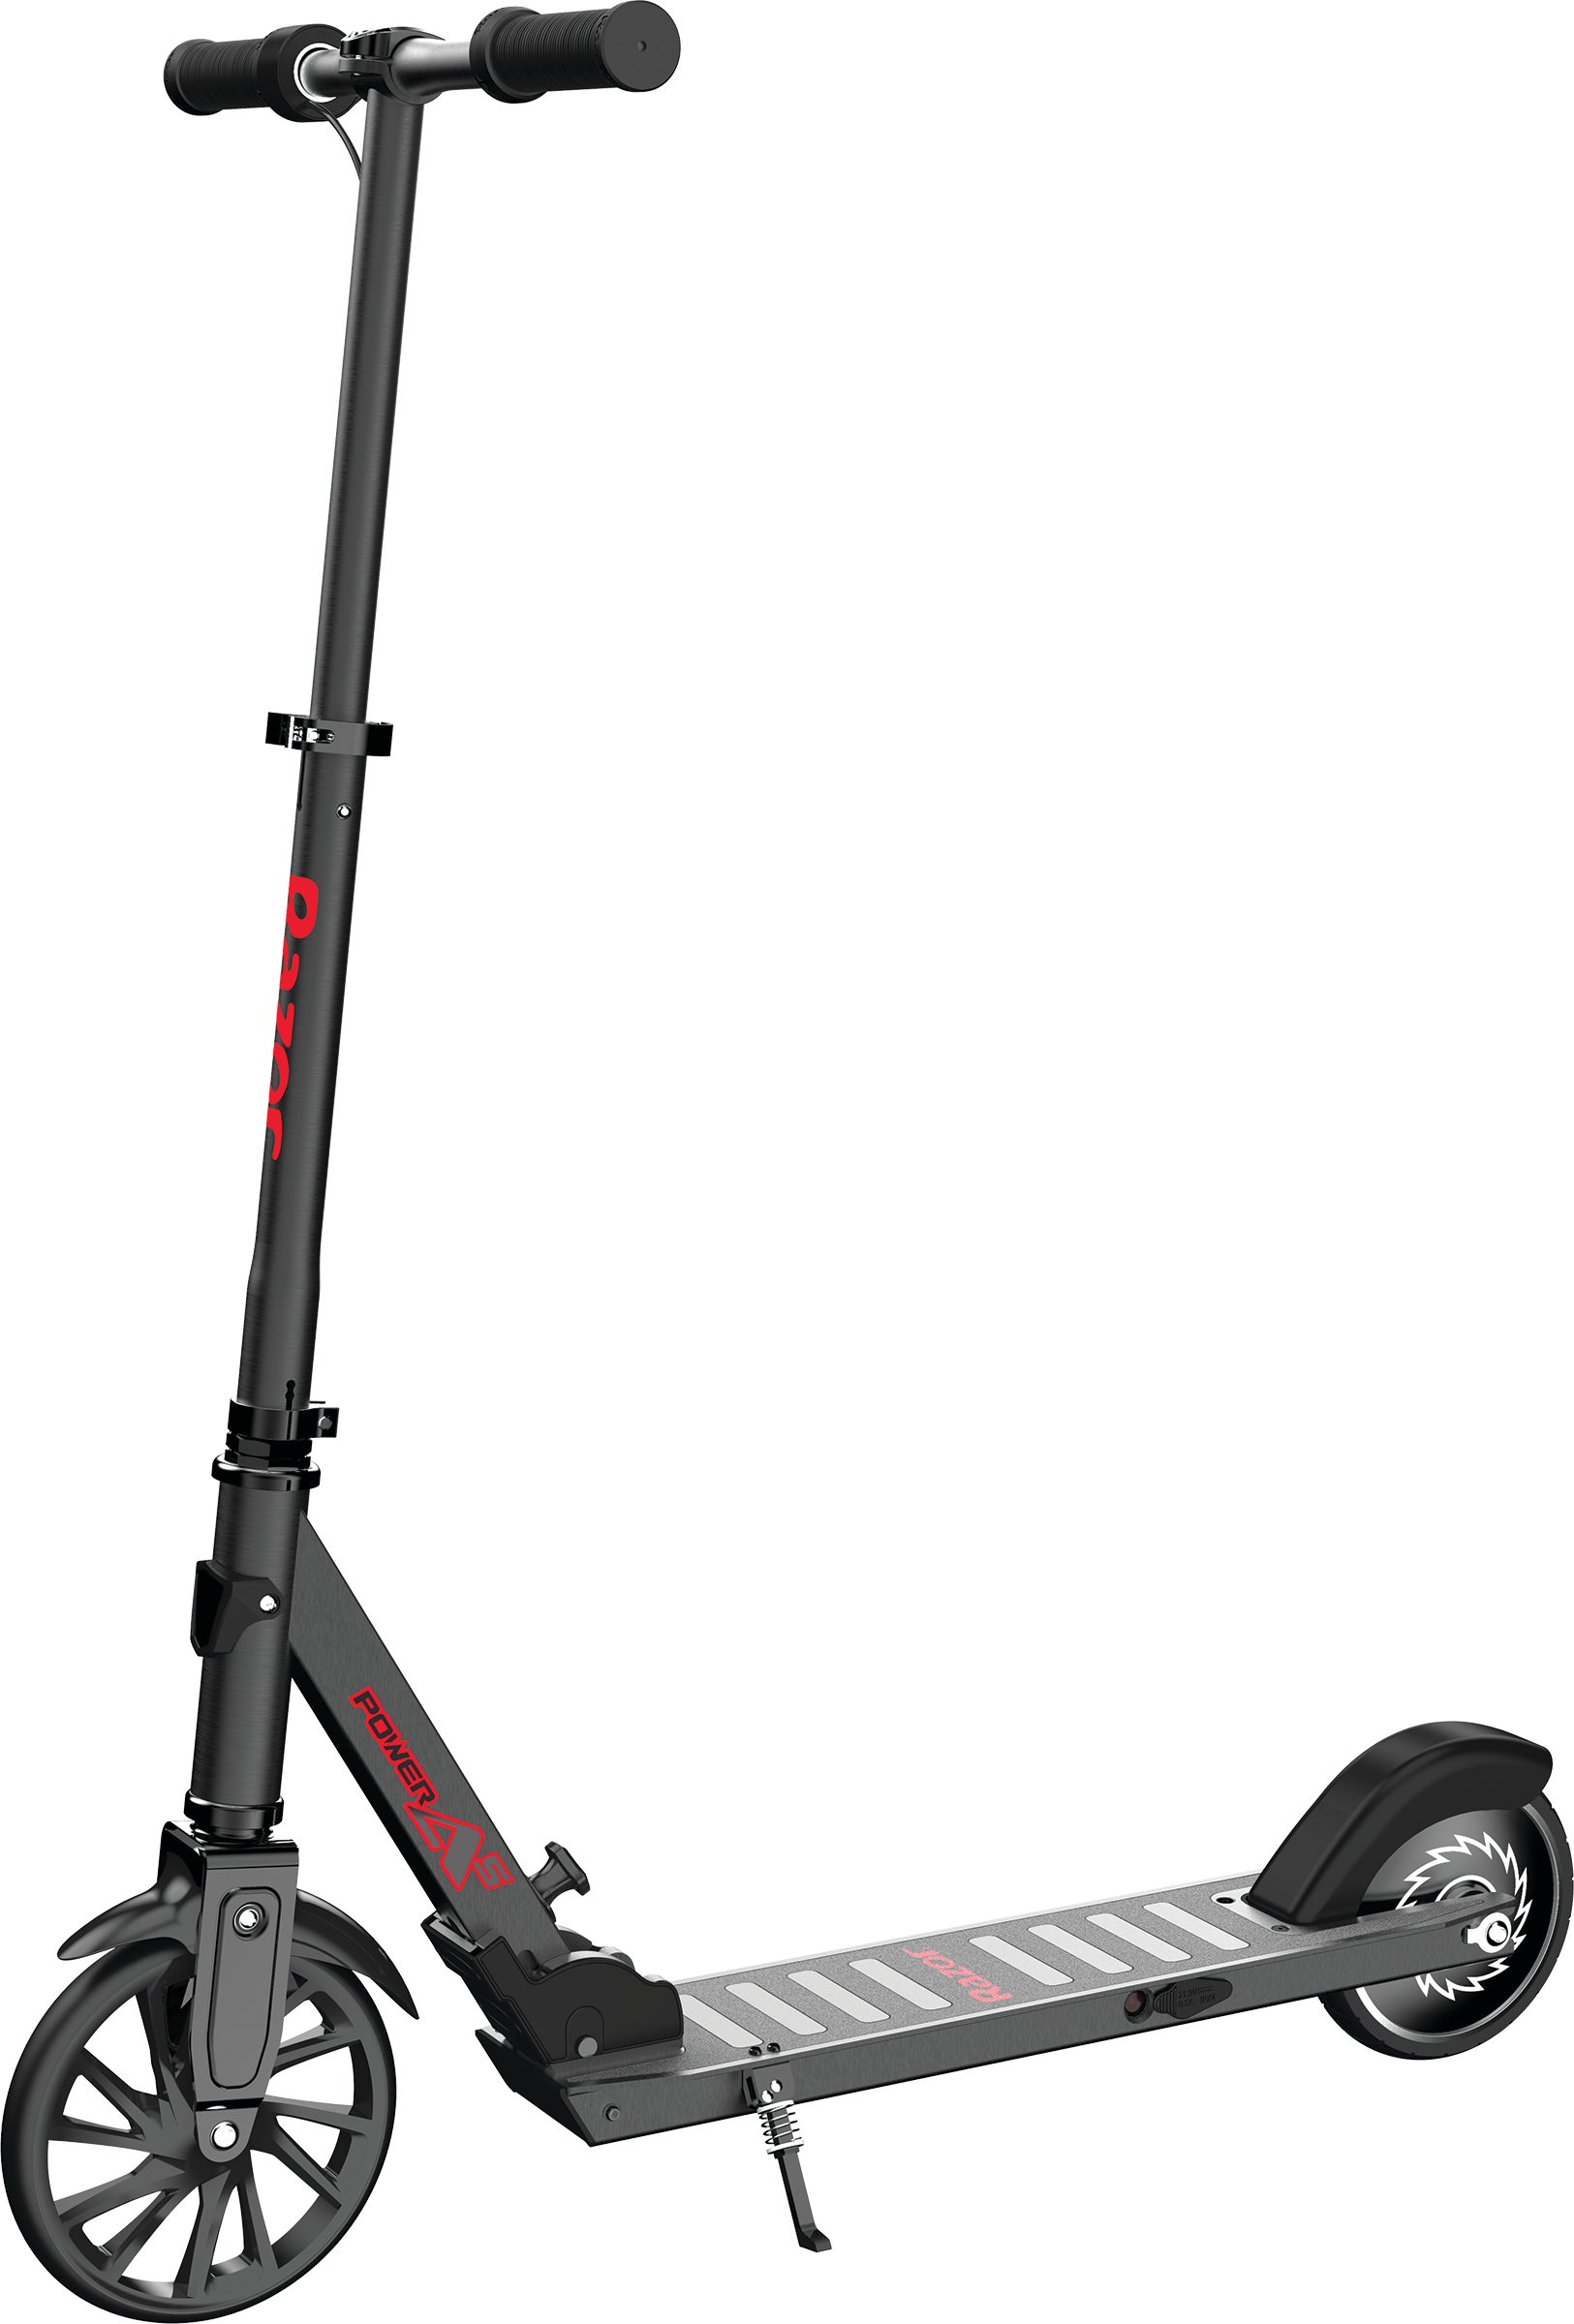 Razor Power A5 Black Label Folding Electric Scooter, for Ages 8+ and up to 176 lbs, 150W Hub Motor Rear-Wheel Drive, Up to 10 mph & Up to 40 mins of Ride Time, 22V Lithium-ion Battery - image 1 of 13